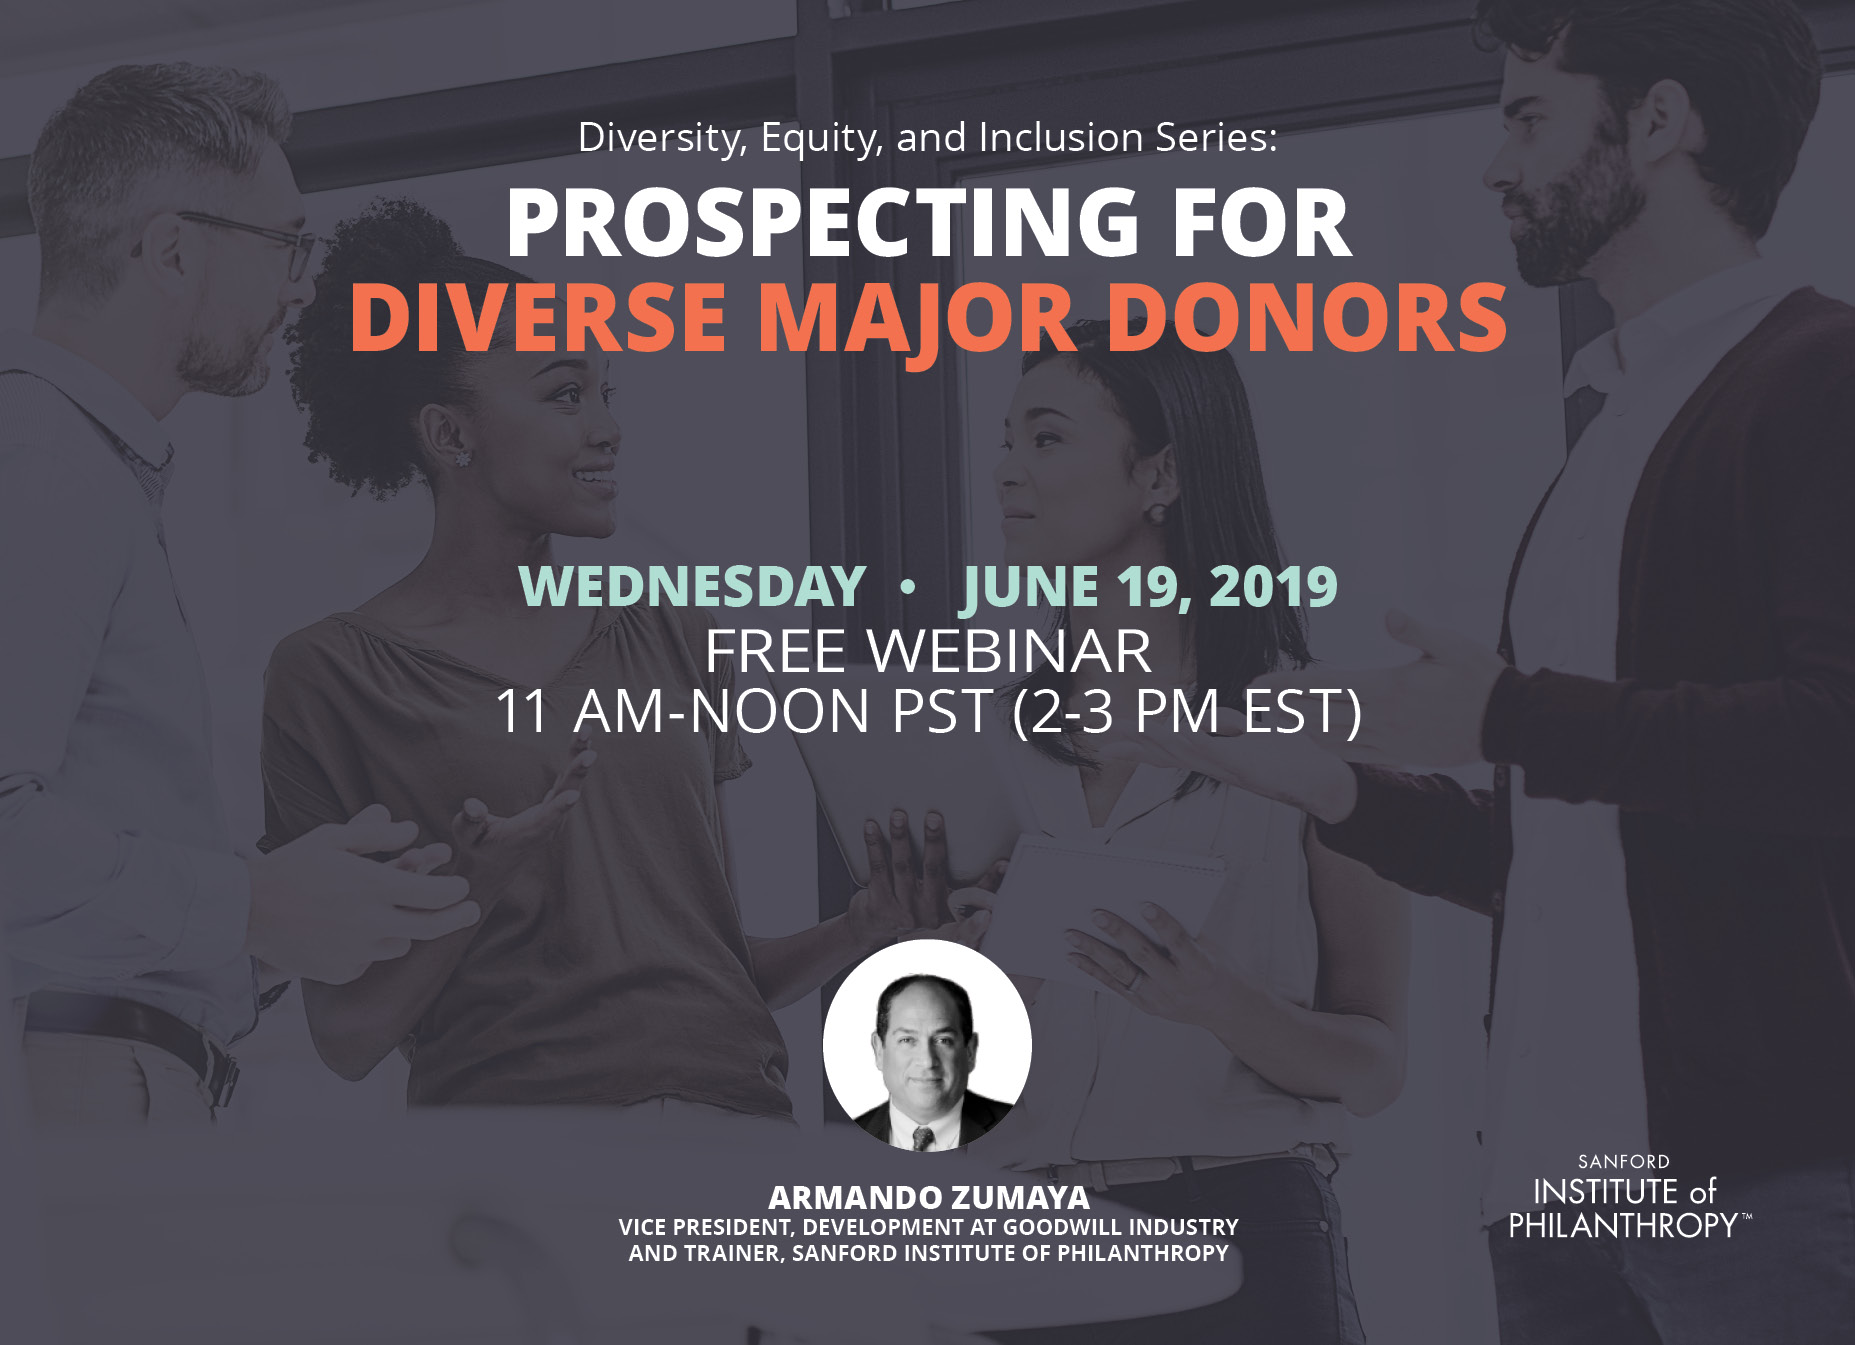 Diversity, Equity, and Inclusion Series Webinar